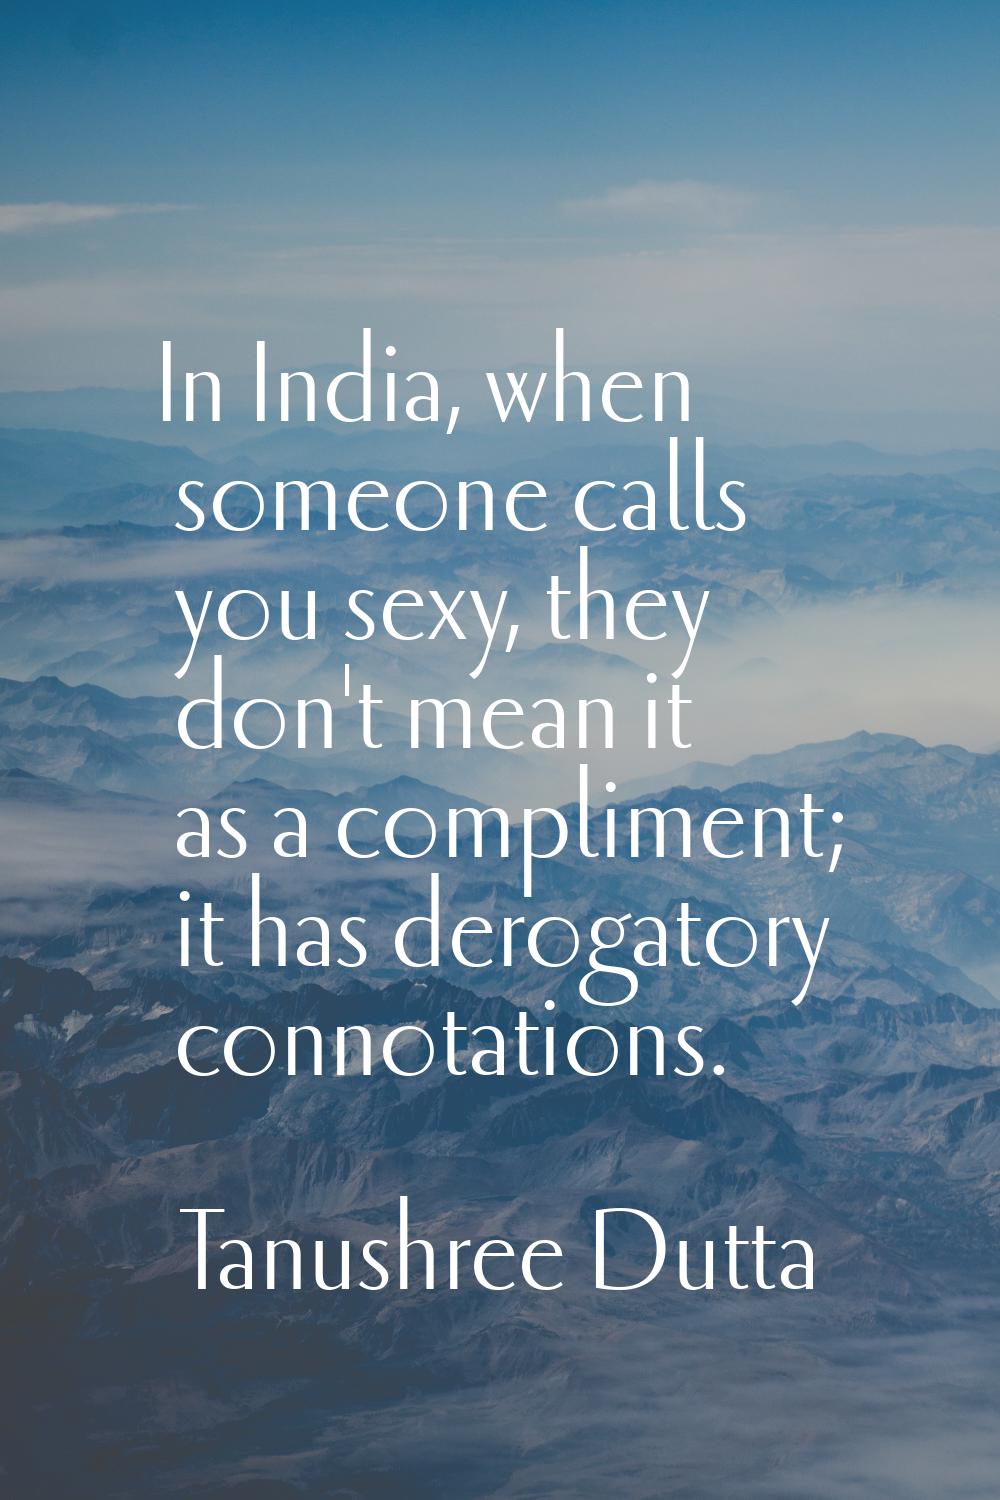 In India, when someone calls you sexy, they don't mean it as a compliment; it has derogatory connot